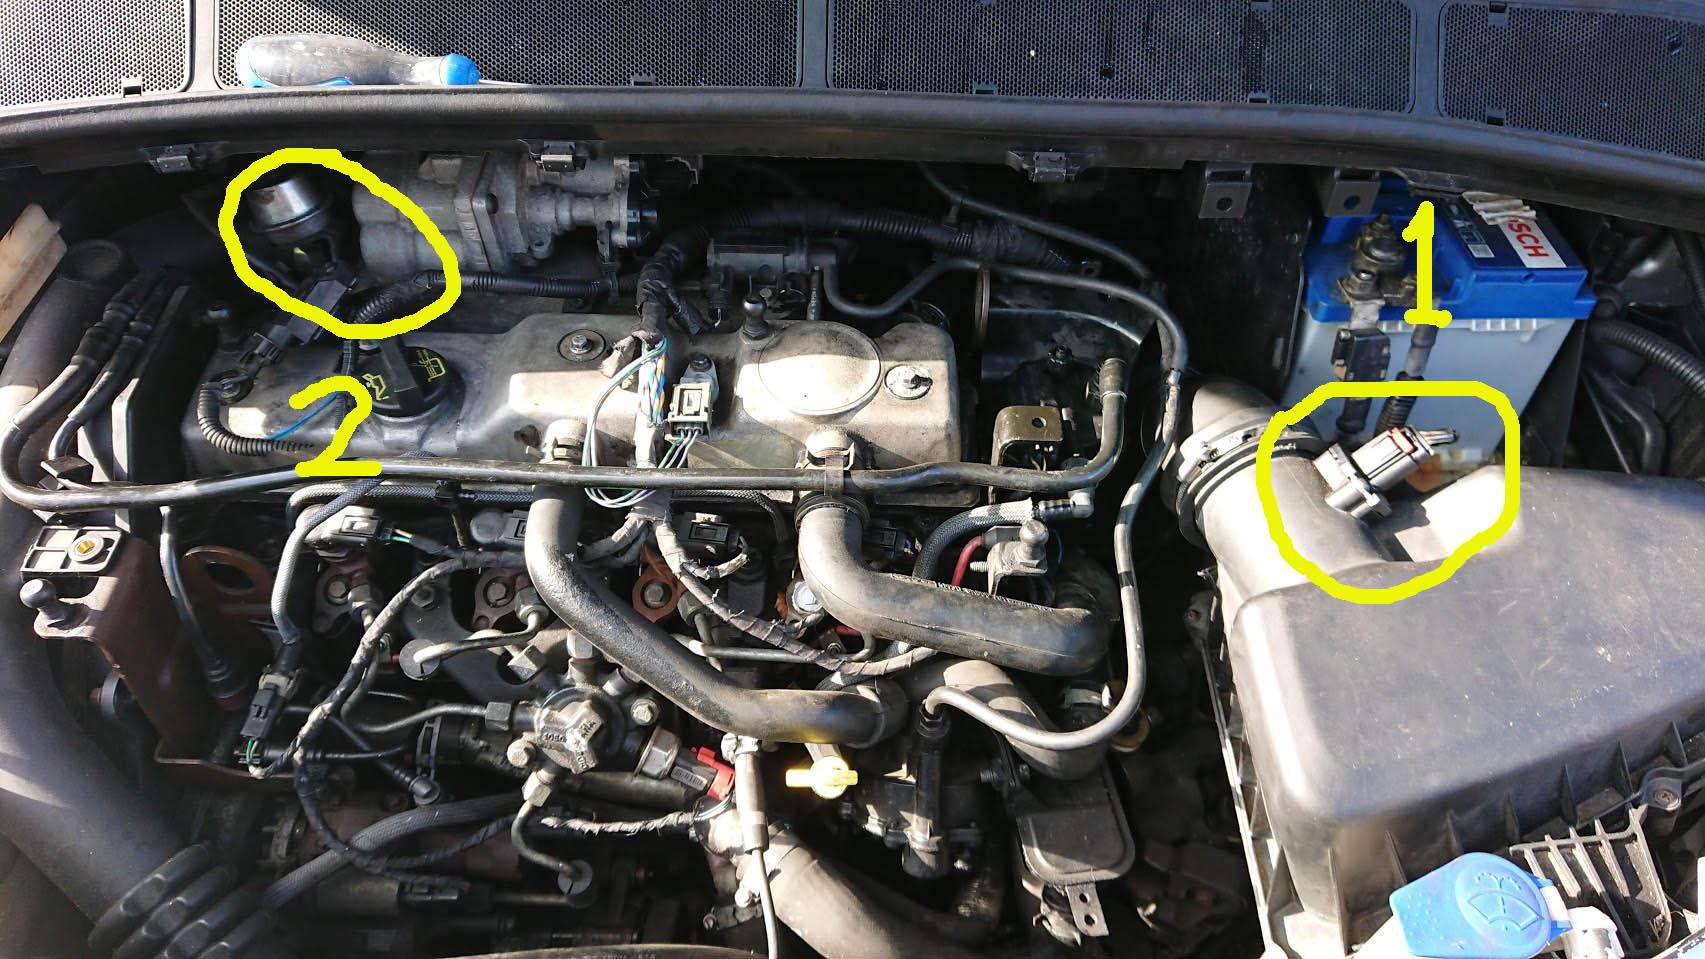 P0098 Intake Air Temp Sensor 2 Circuit High Input. Have I Found The Right Sensor? - Ford Galaxy Club - Ford Owners Club - Ford Forums